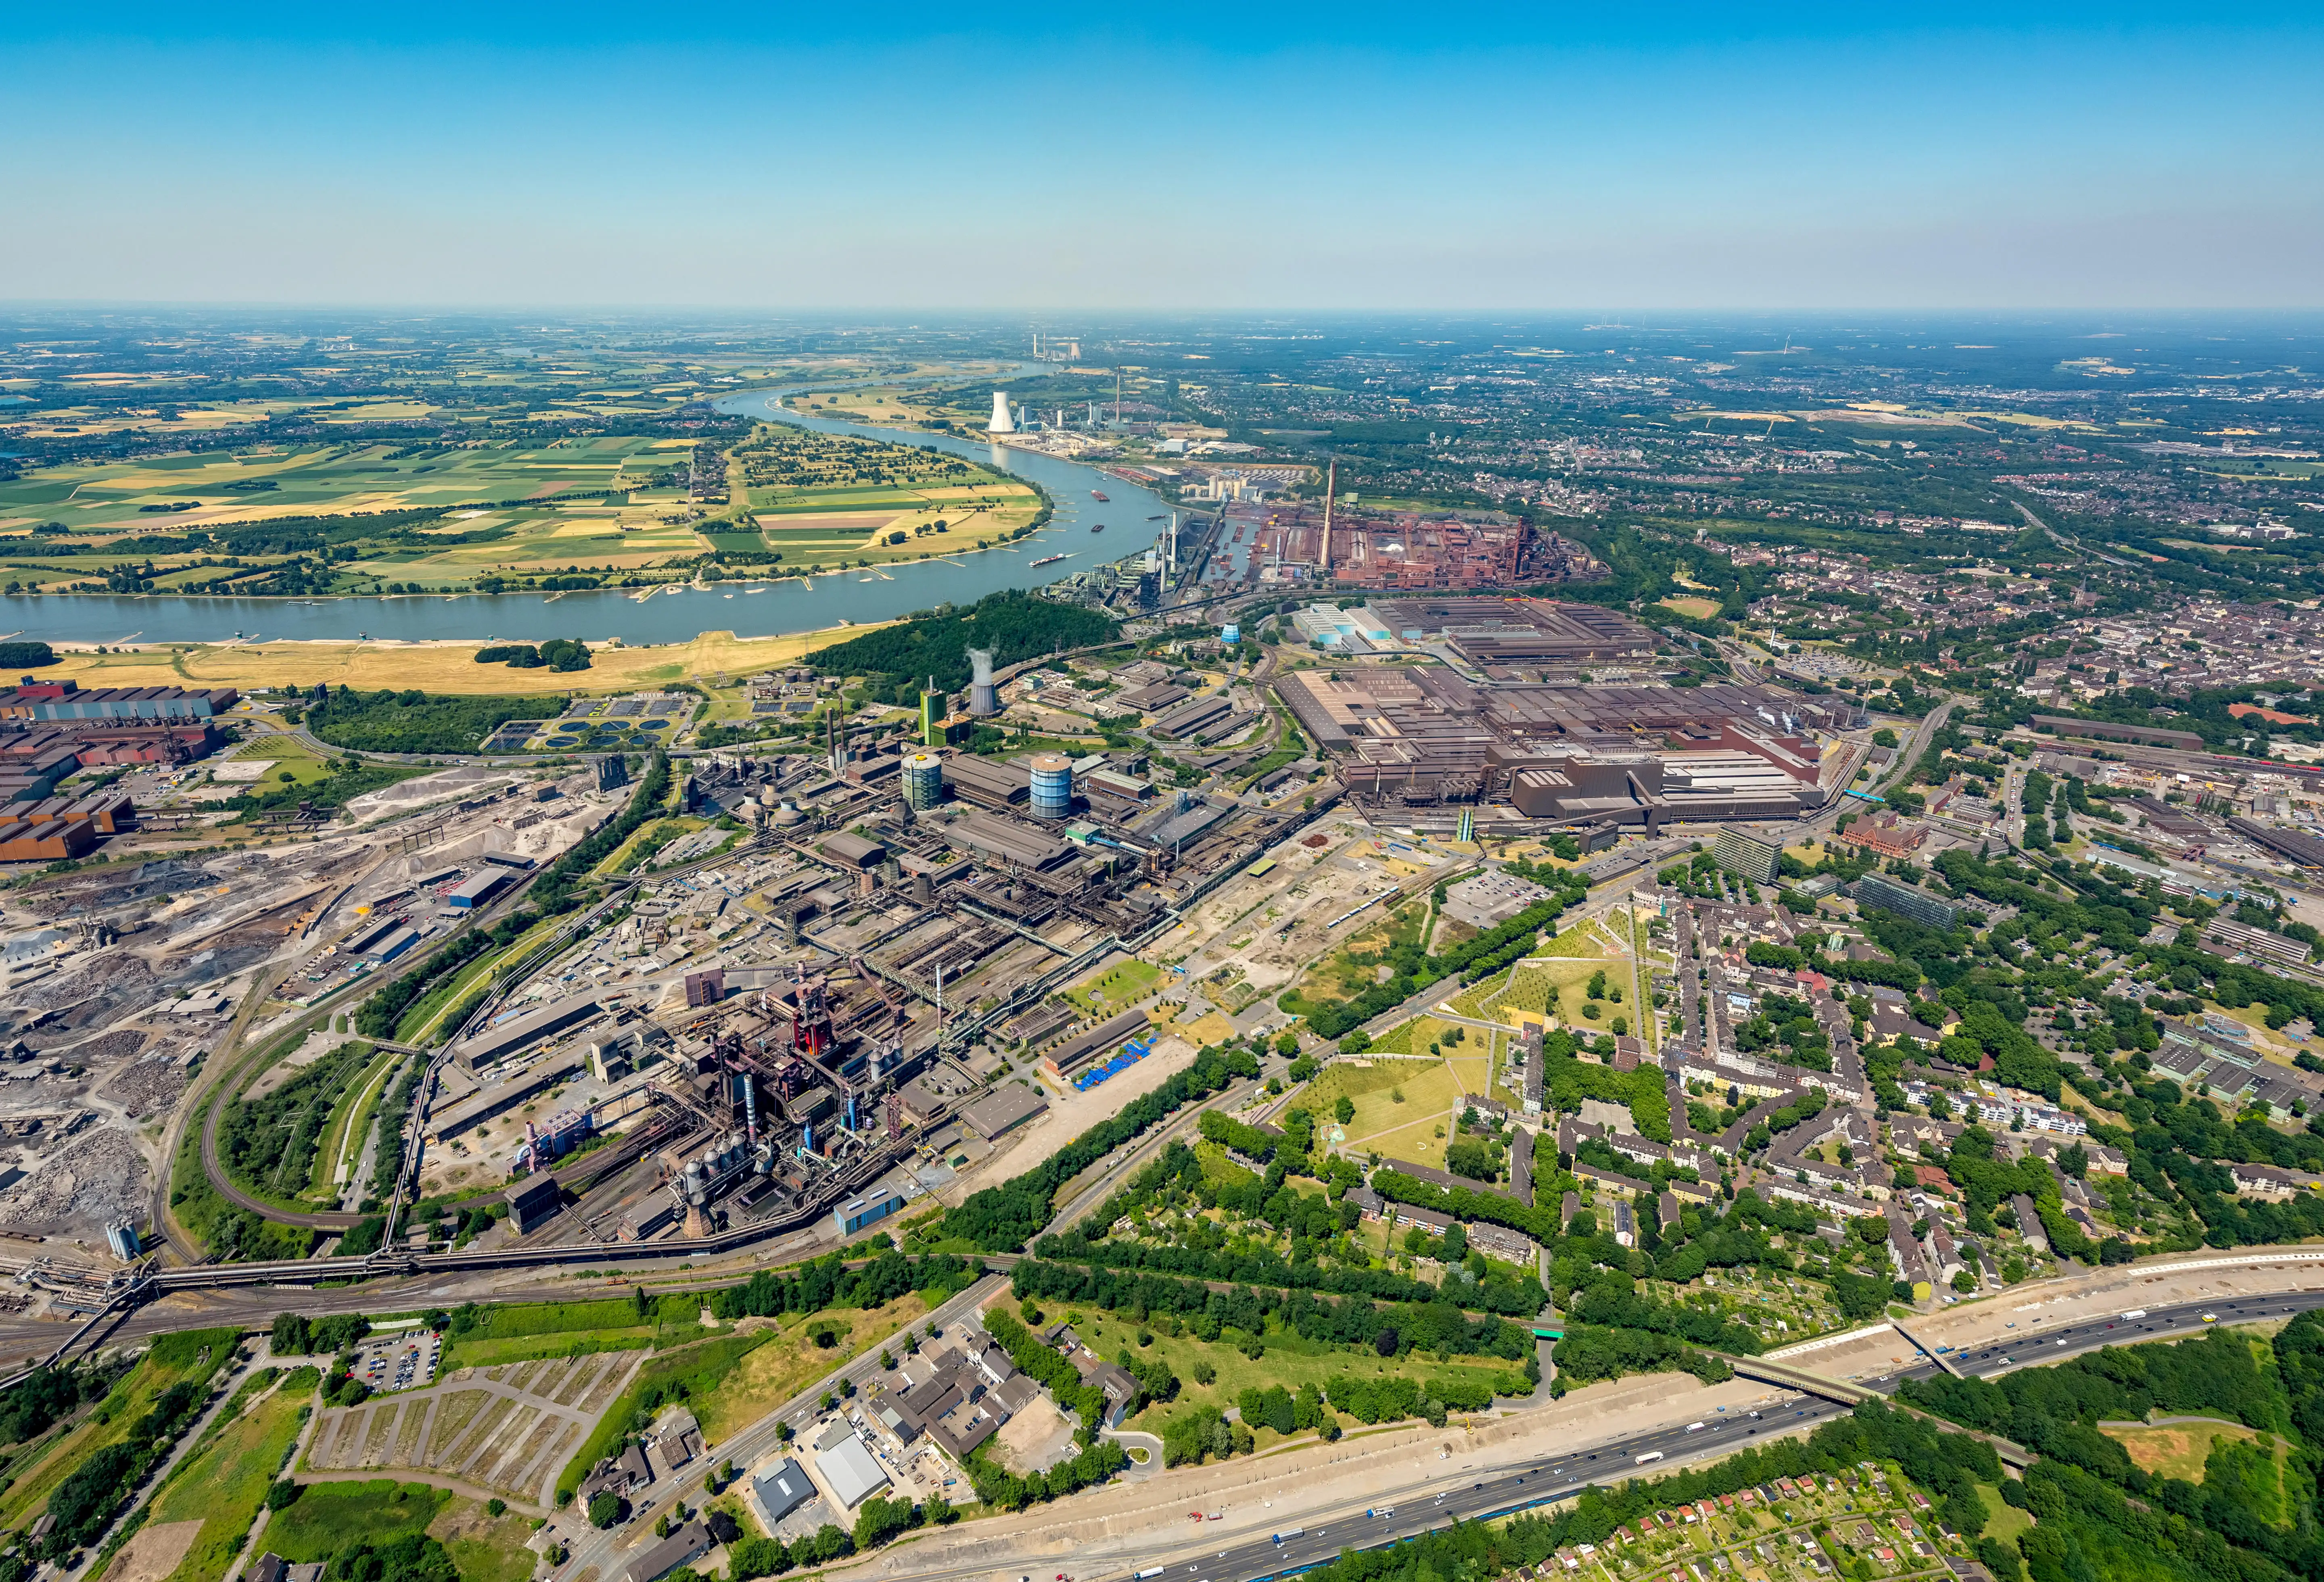 An industrial park next to a town and river